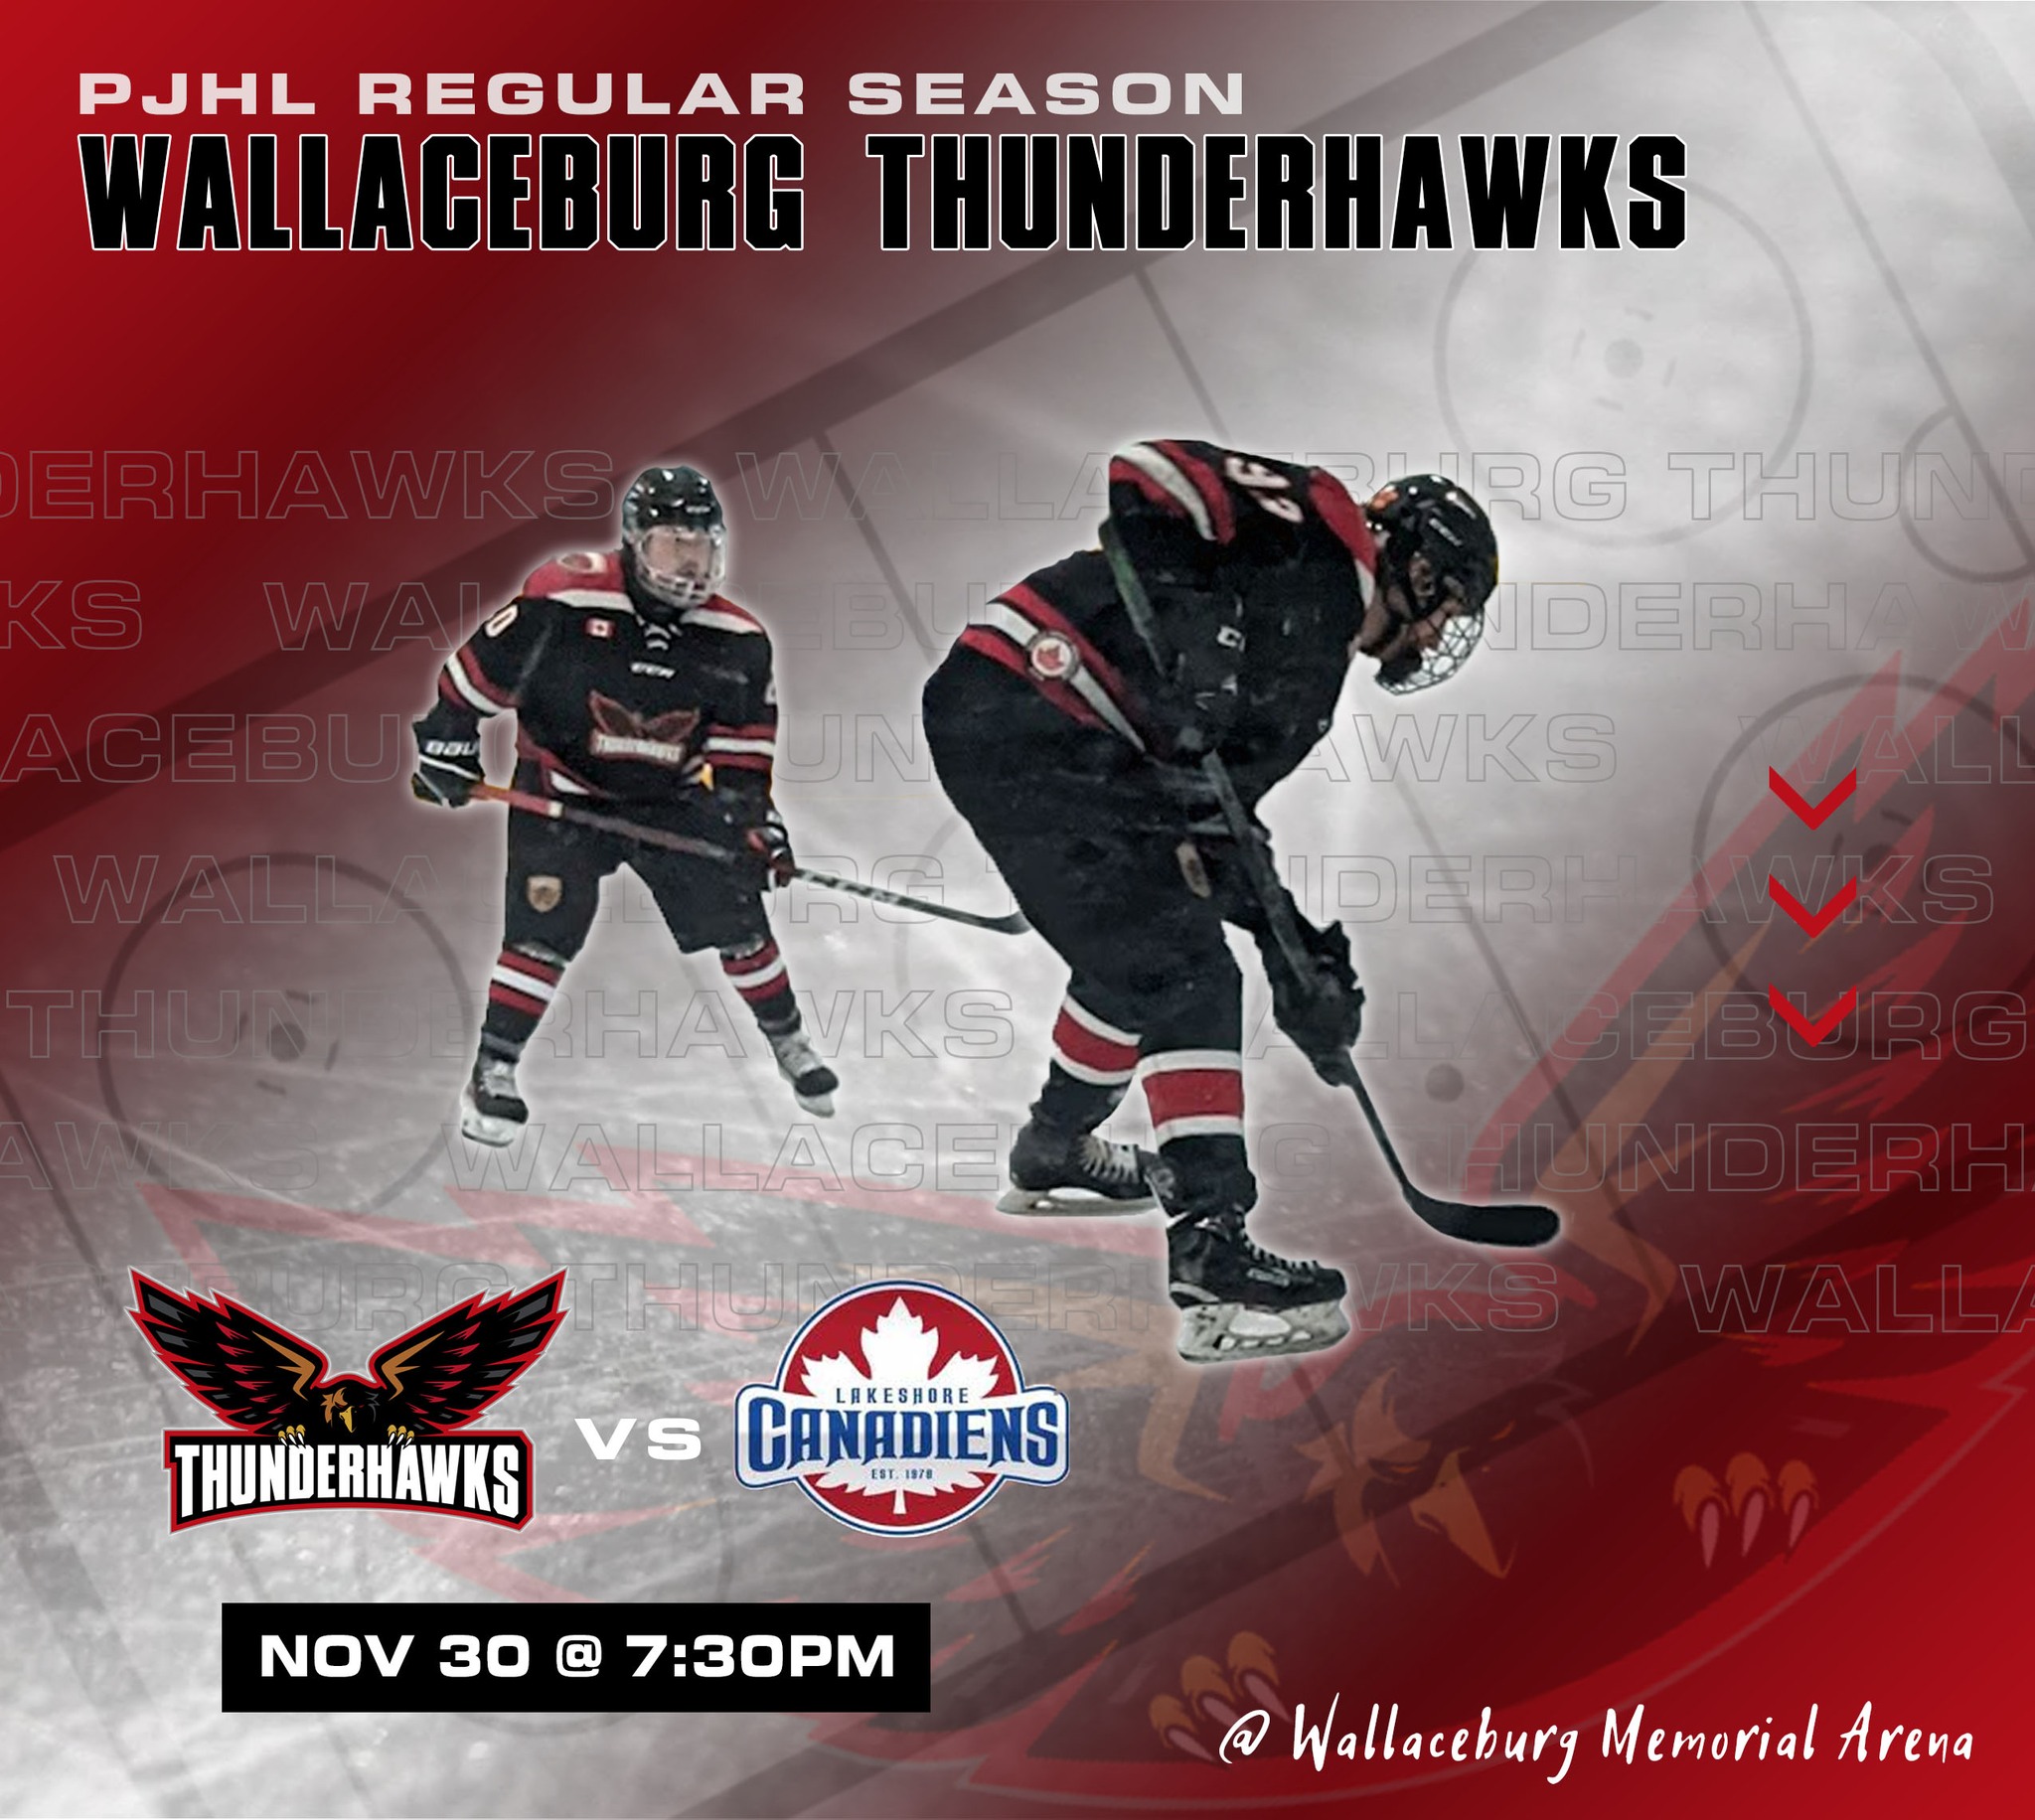 🚨It's GAME DAY!!🚨

Your Wallaceburg Thunderhawks are in action tonight versus the Lakeshore Canadiens @ Wallaceburg Memorial Arena.

🏒Puck drops at 7:30pm

#pjhl #hockey #Thunderhawks #hawksnest